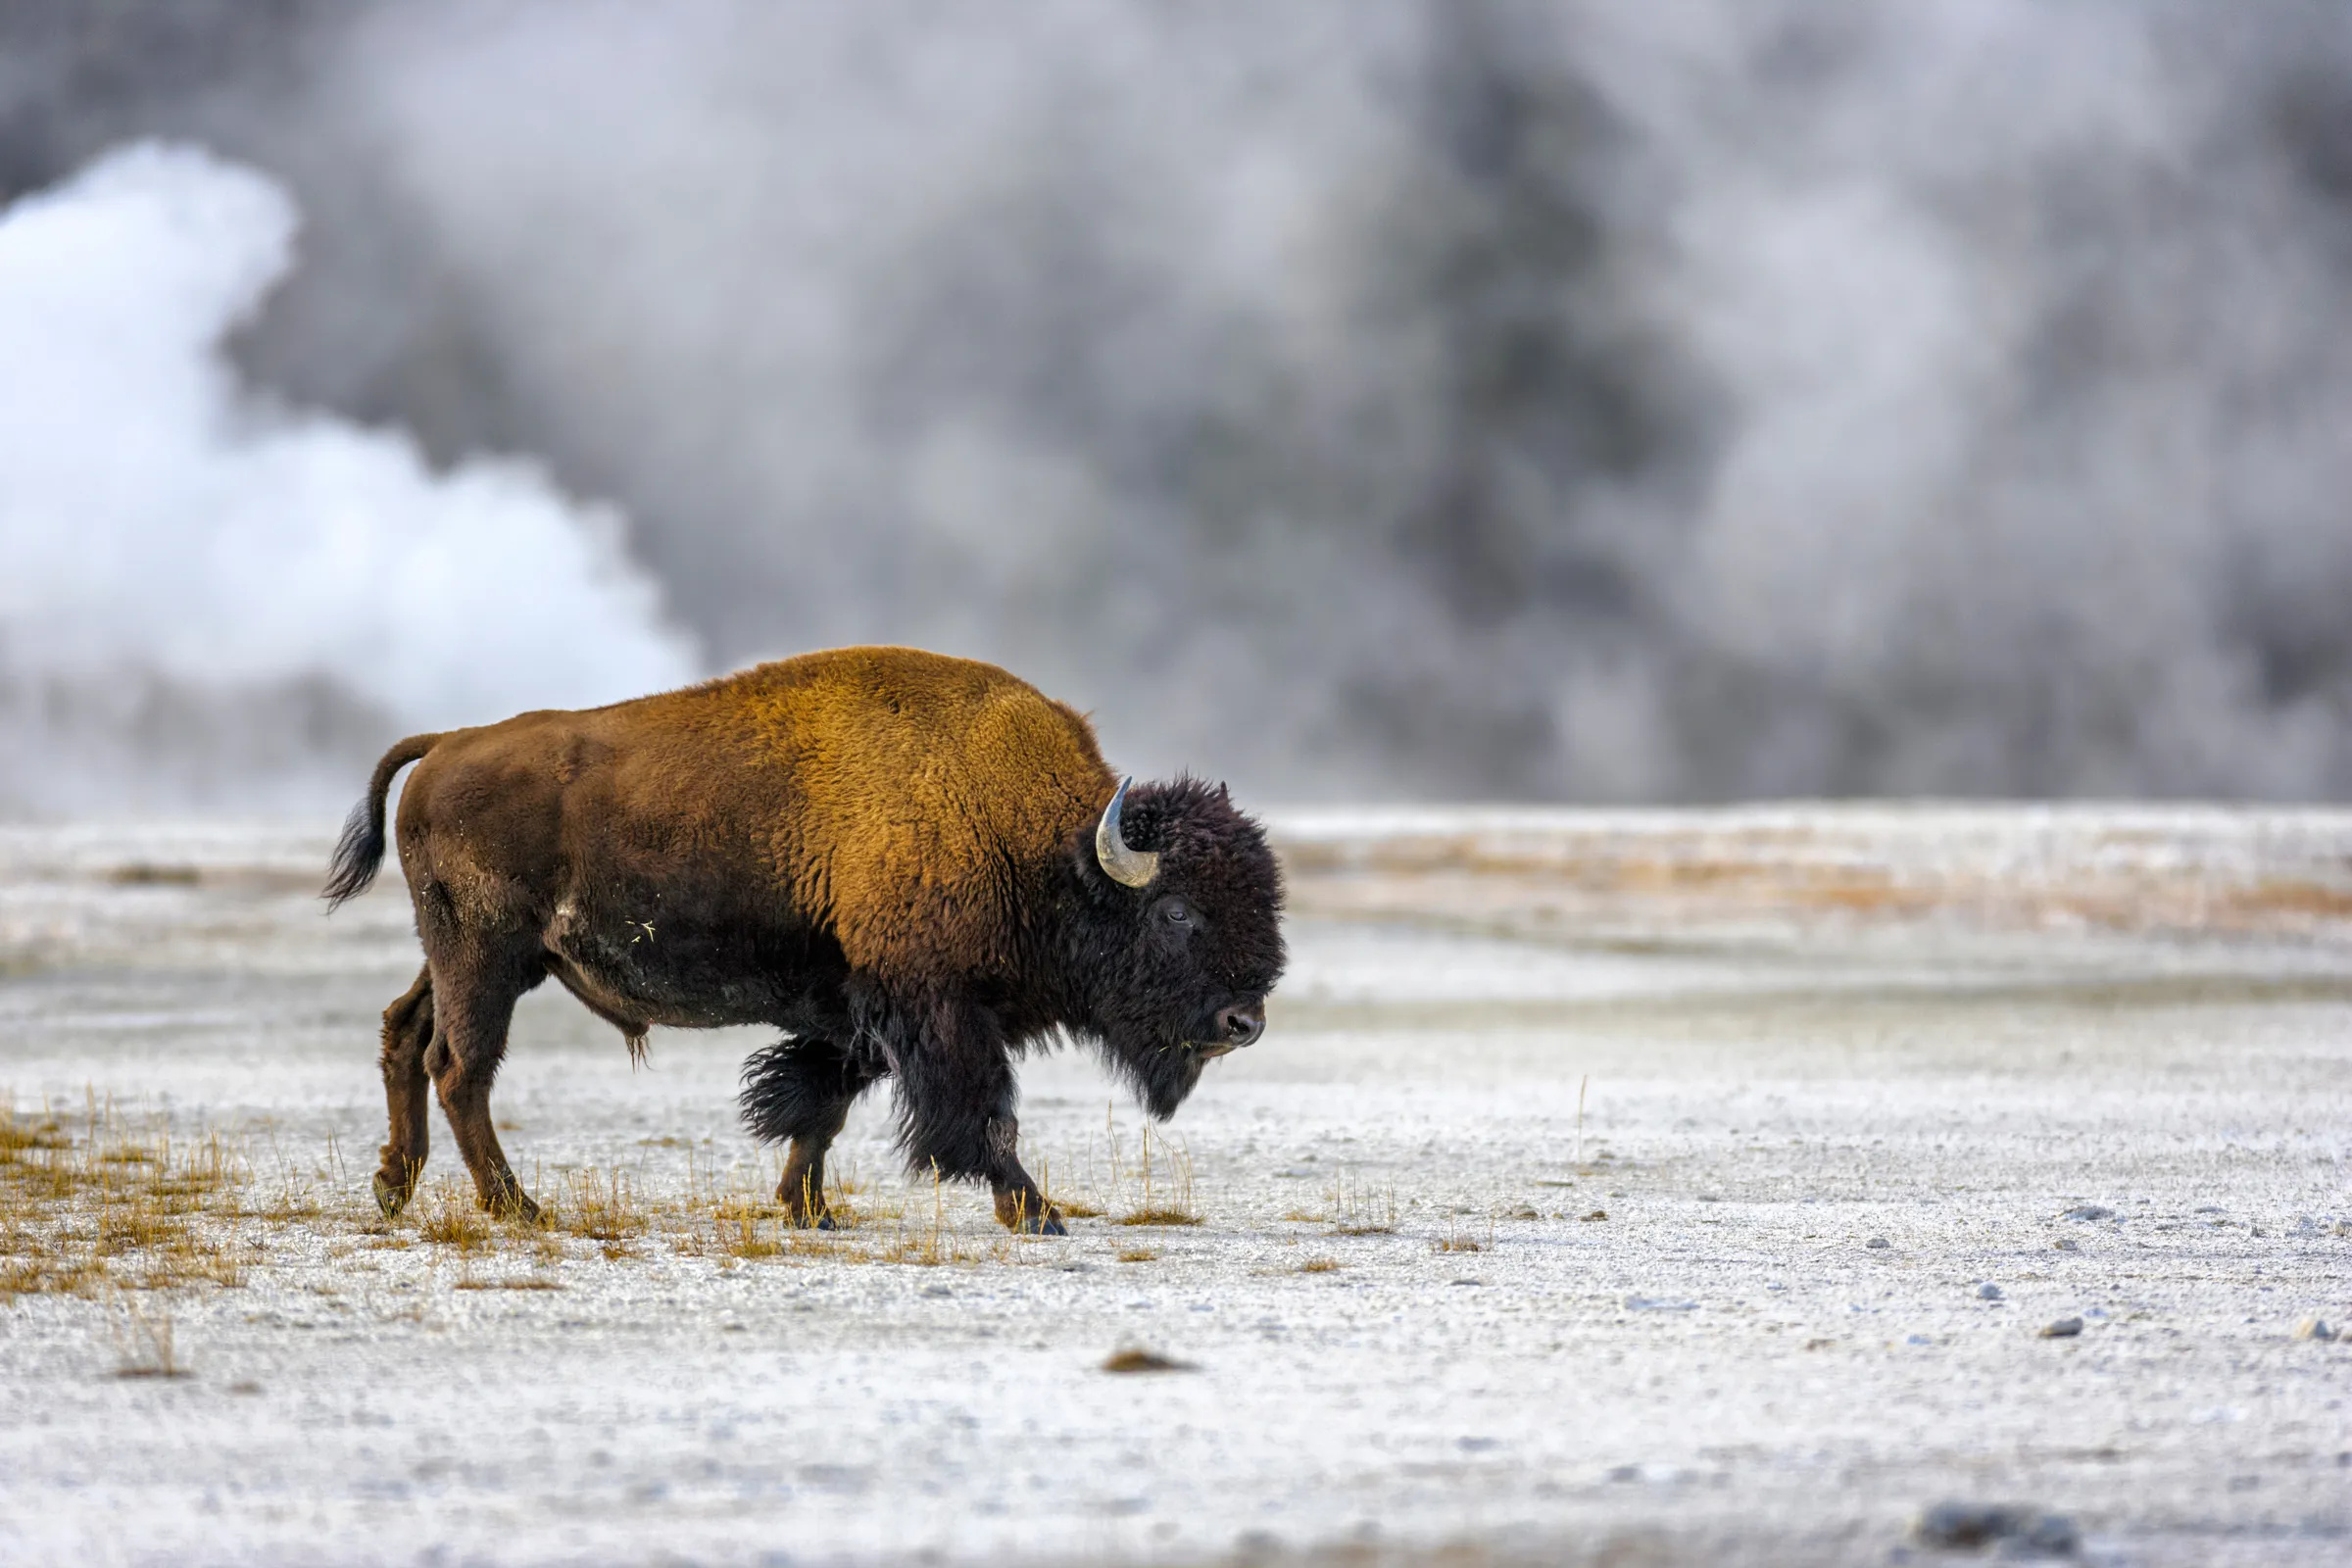 Bison's return, Ecosystem revival, Impacts of buffalo's homecoming, Nature's interconnectedness, 2400x1600 HD Desktop